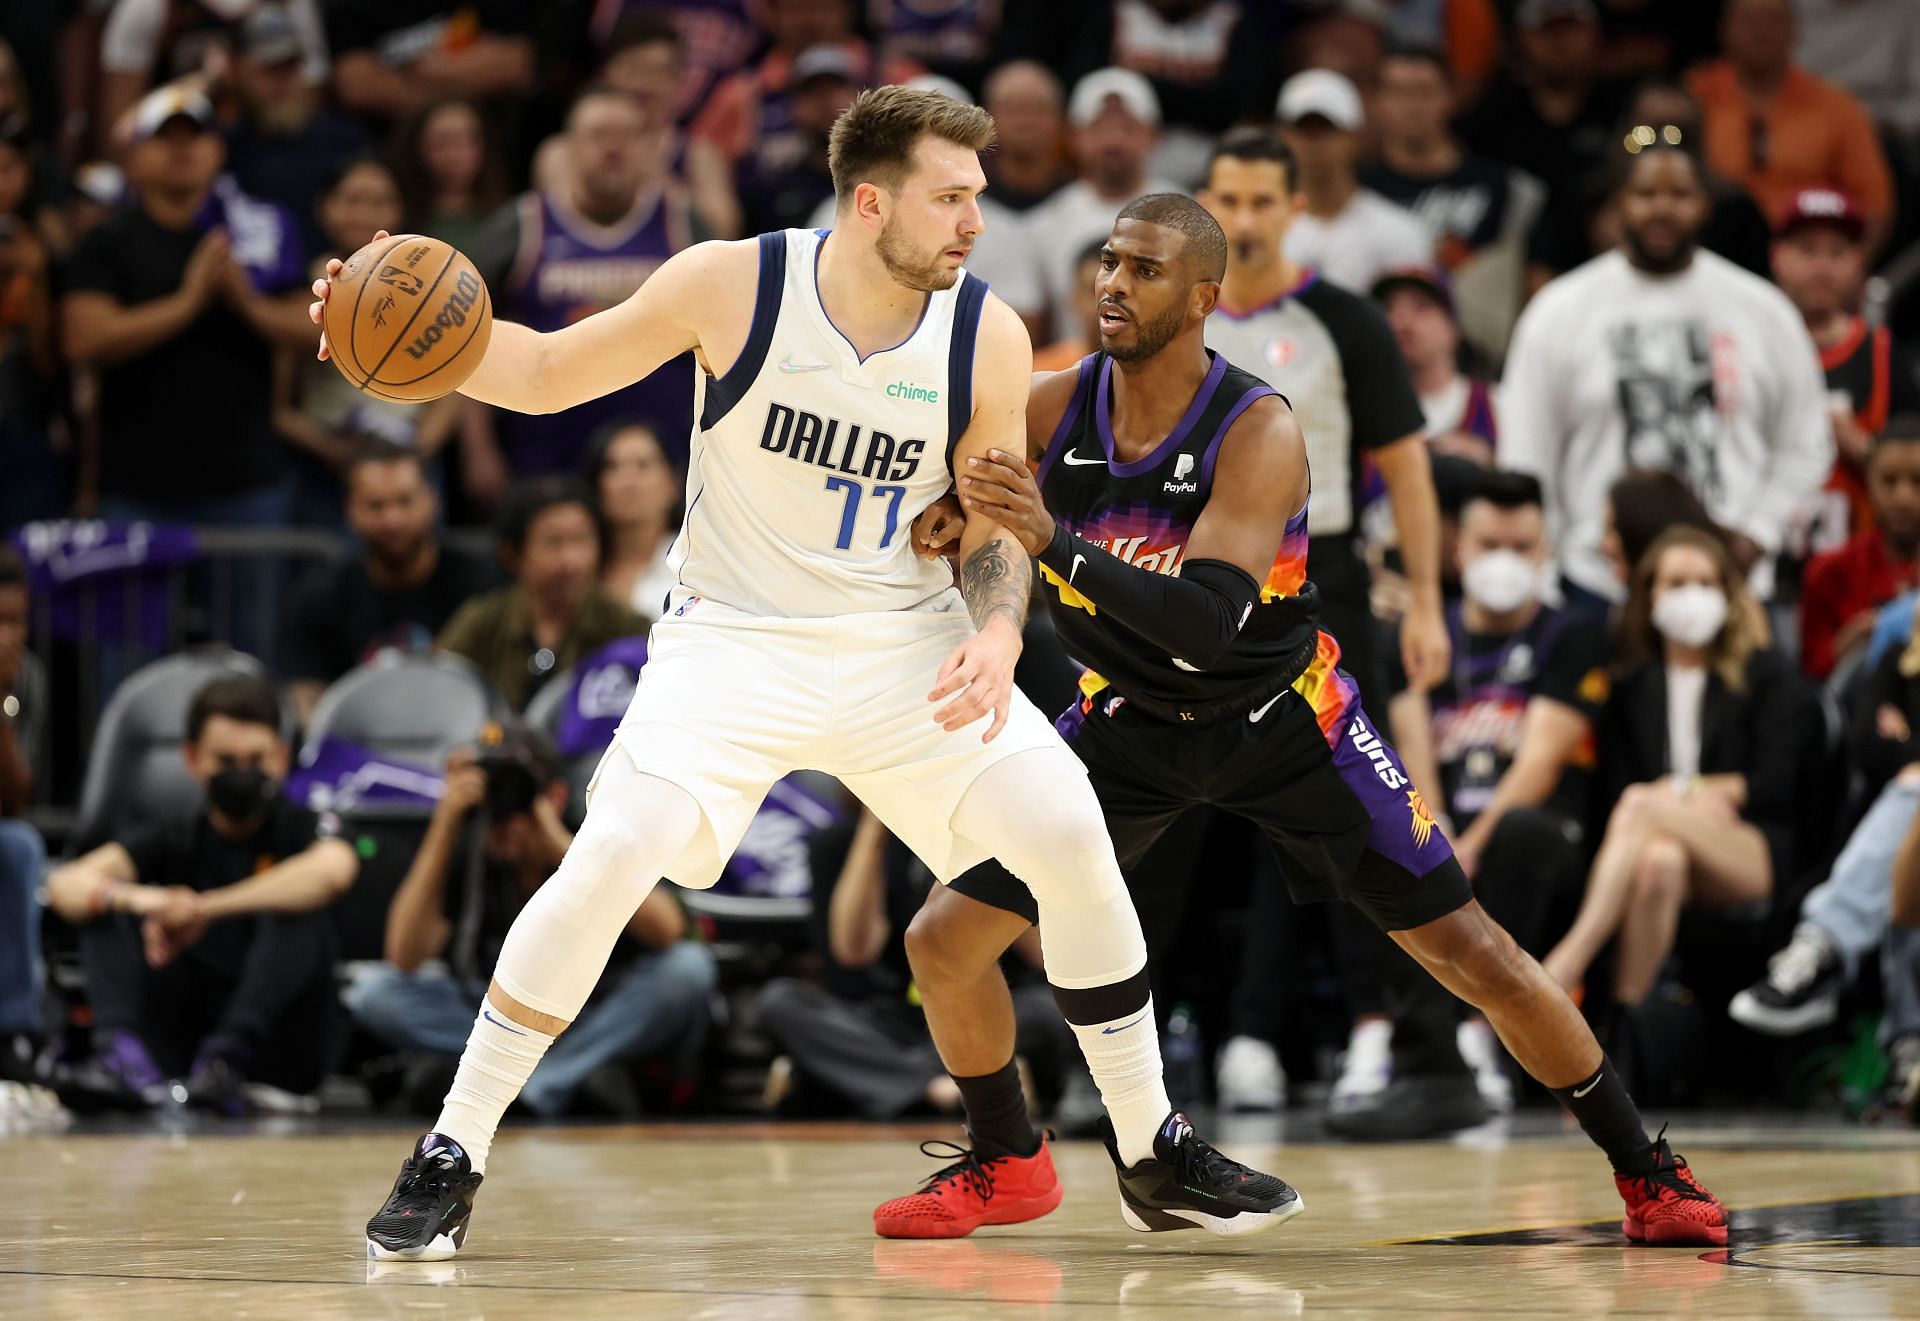 Luka Doncic opened the series against the Suns with 45 points.